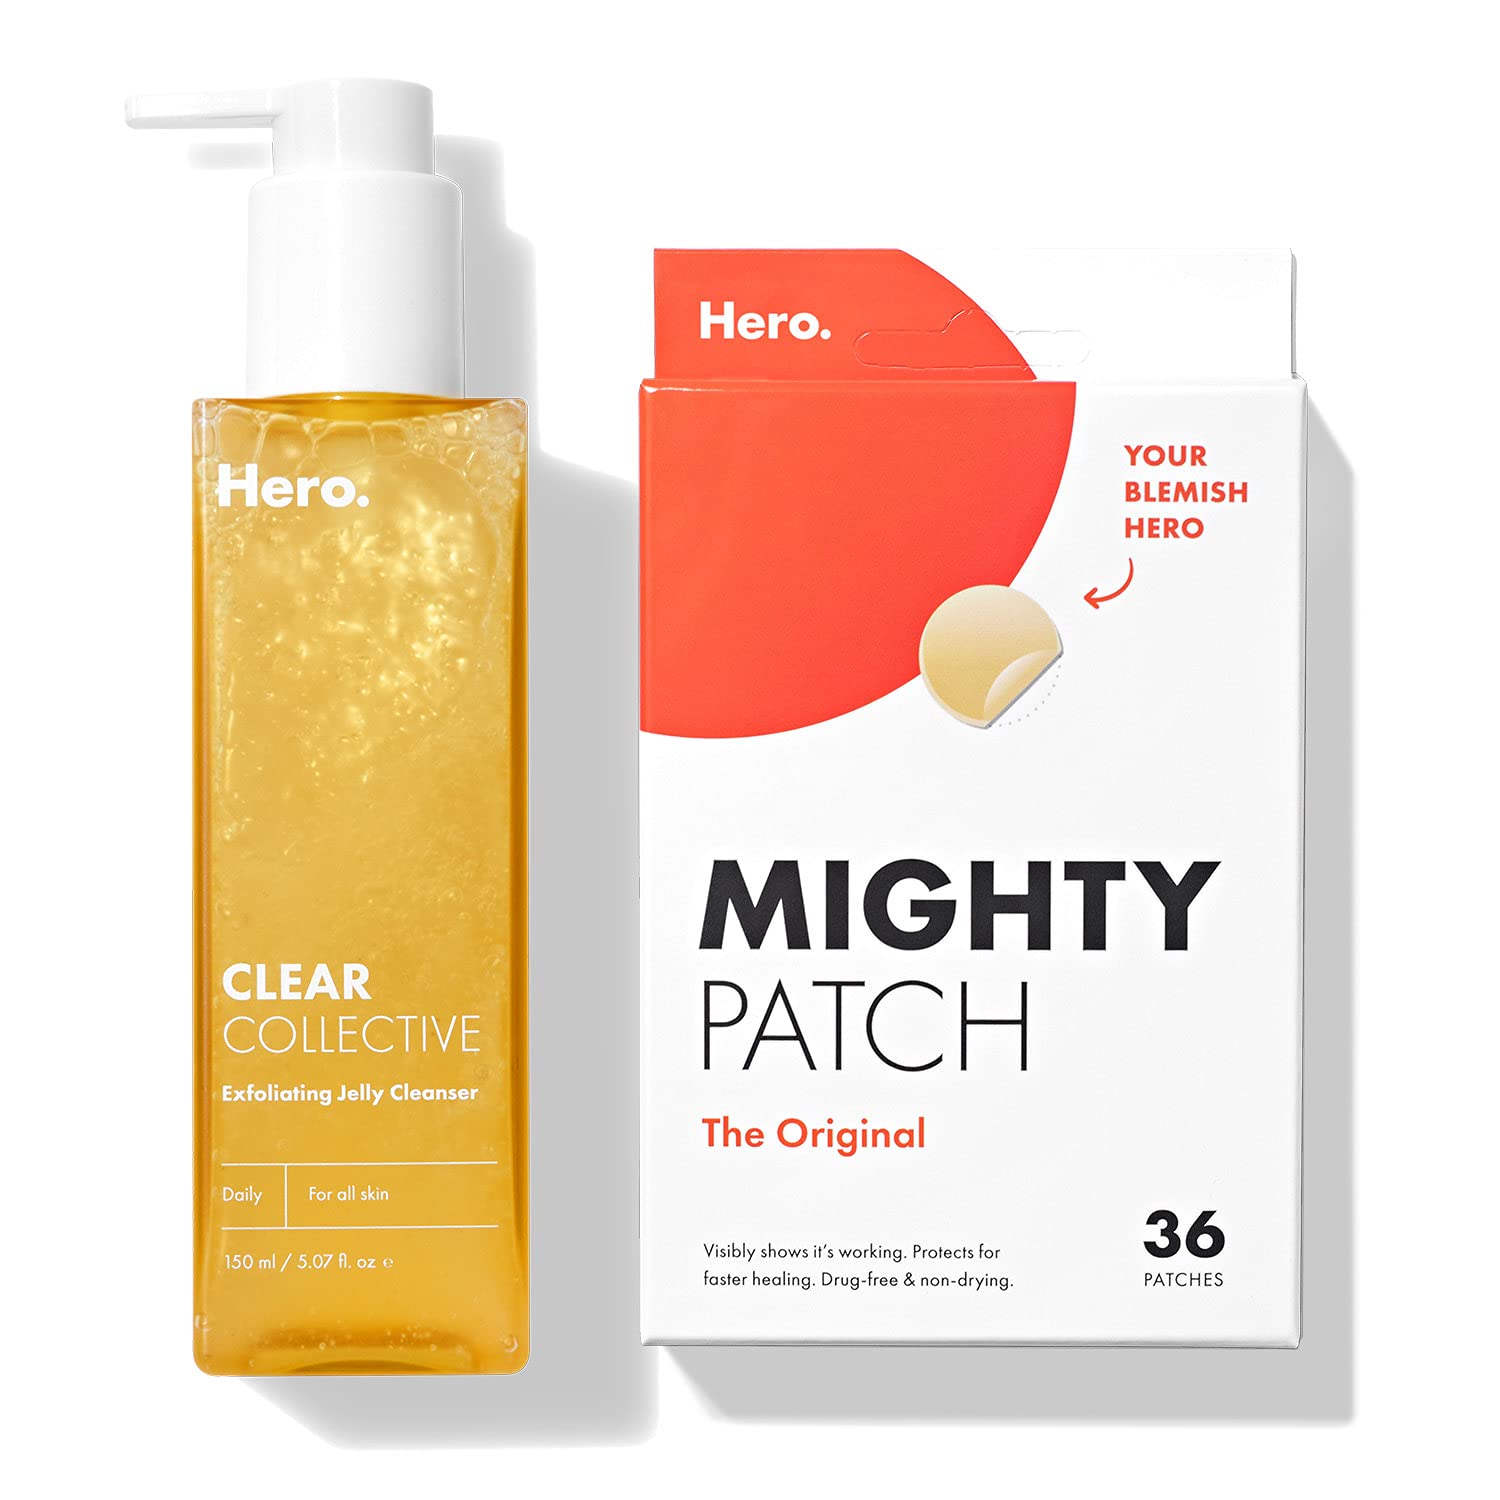 Mighty Patch Hero Original (36 count) and Exfoliating Jelly Cleanser Bundle